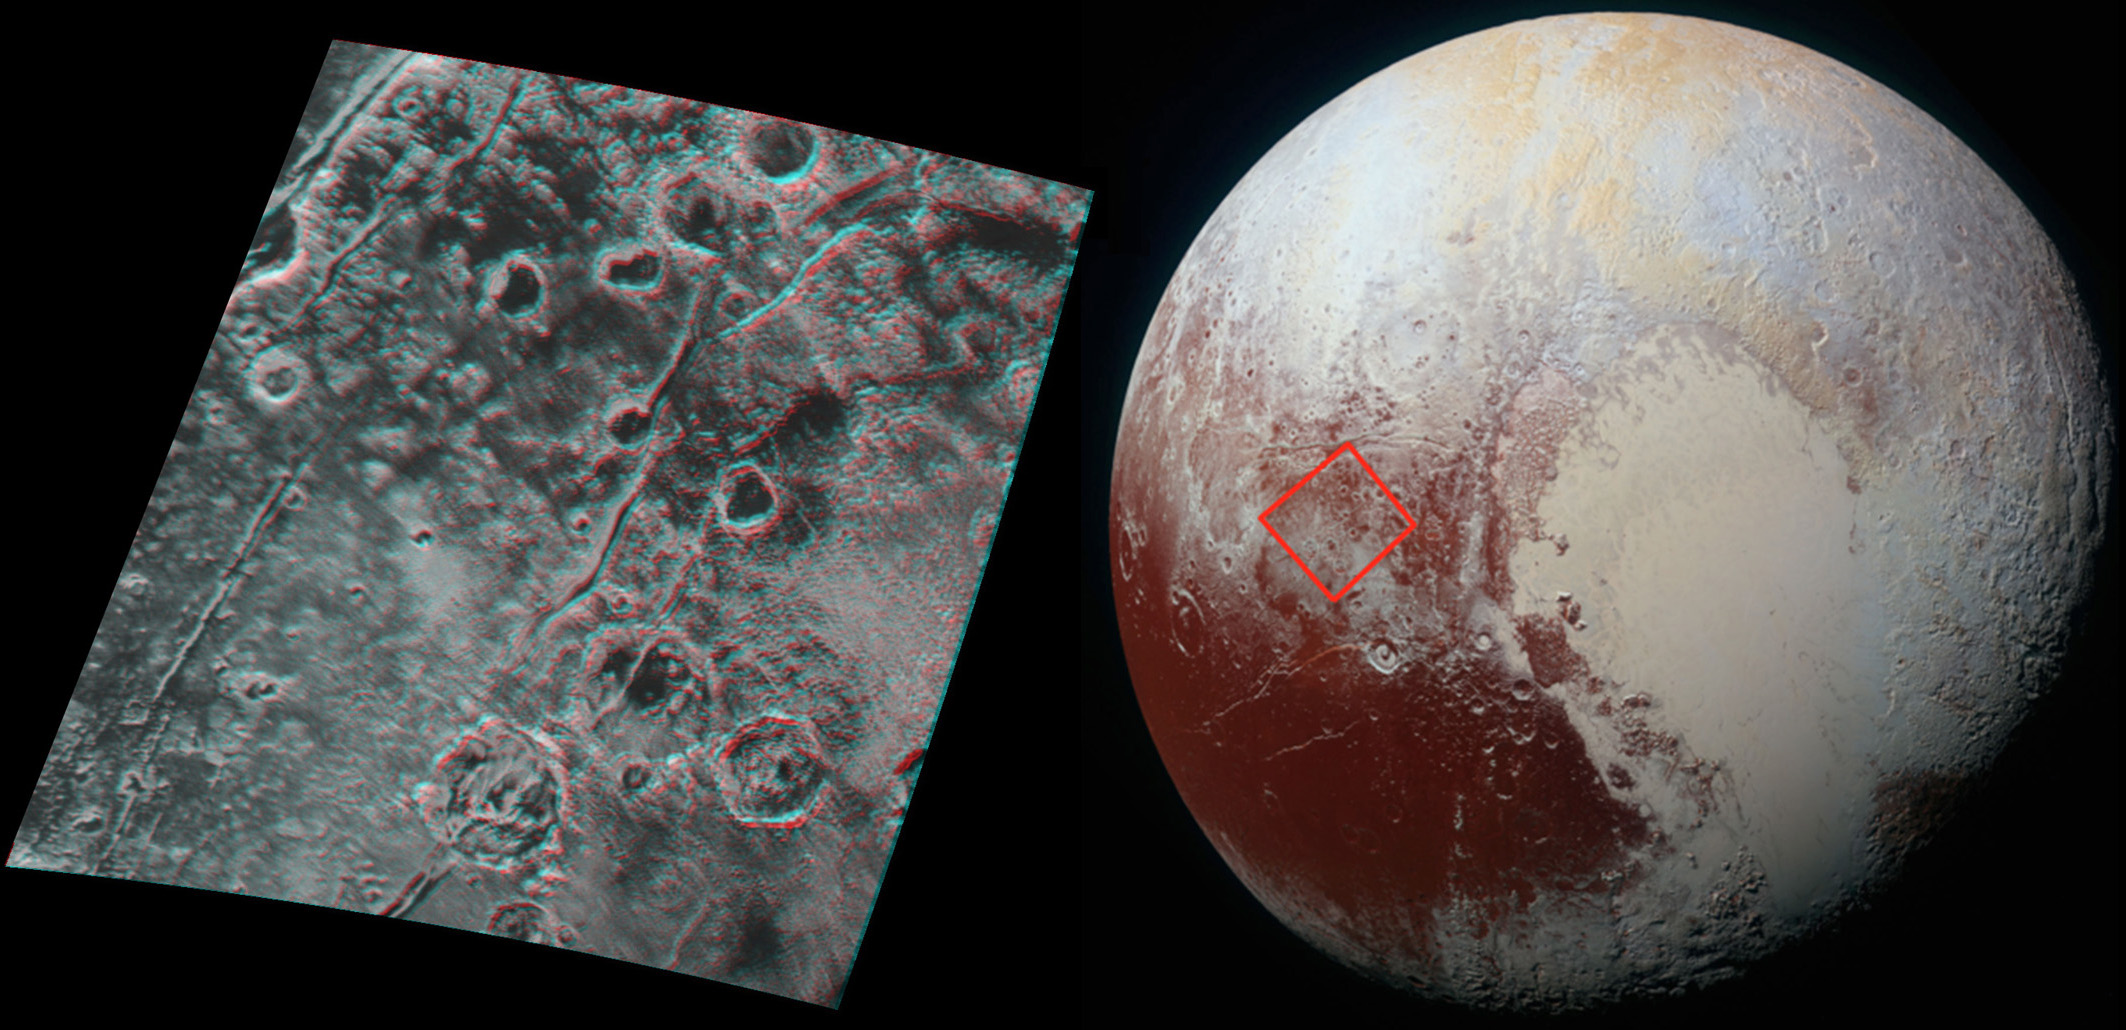 3-D stereo image of Pluto's surface. Red/blue stereo glasses are required to properly view the image. Image Credit: NASA/JHUAPL/SwRI